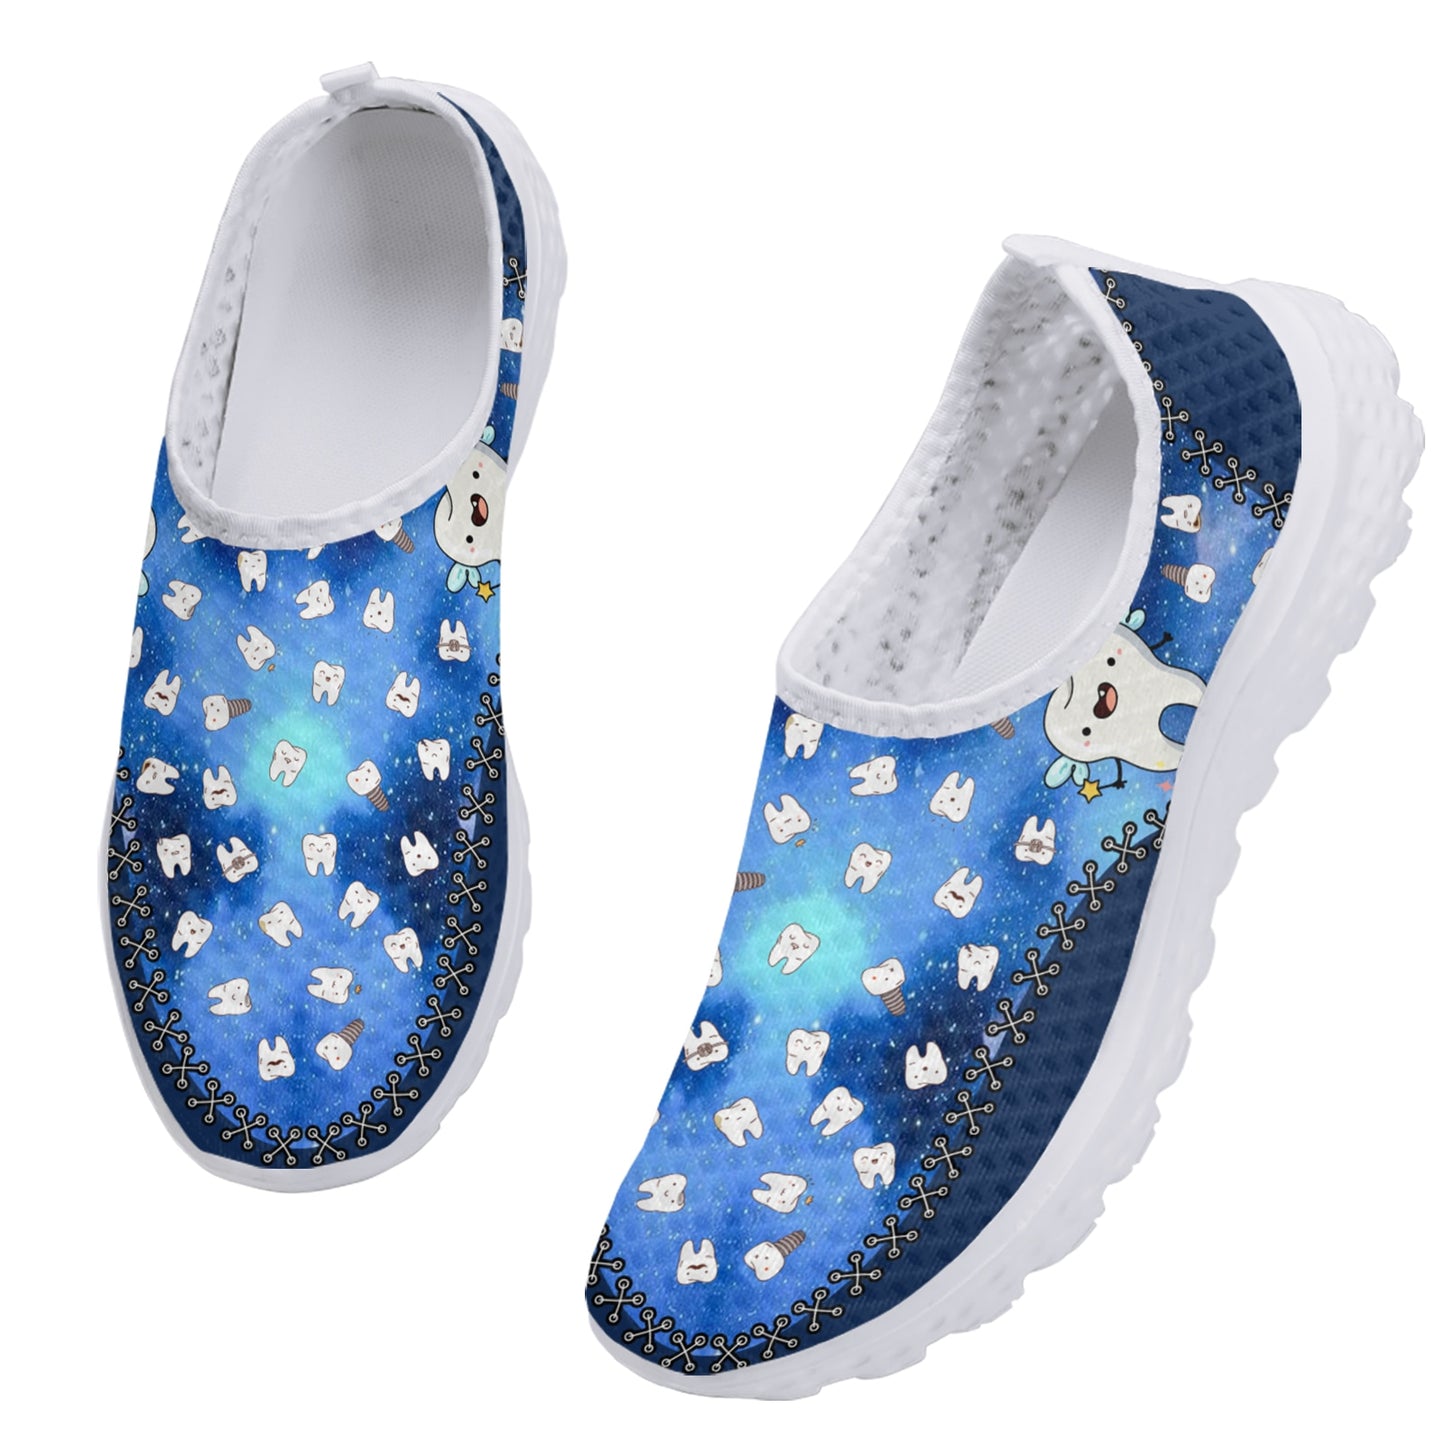 Blue Star Cartoon Teeth Design Lightweight Breathable Mesh Shoes Soft Comfortable Apartment Shoes Walking Shoes